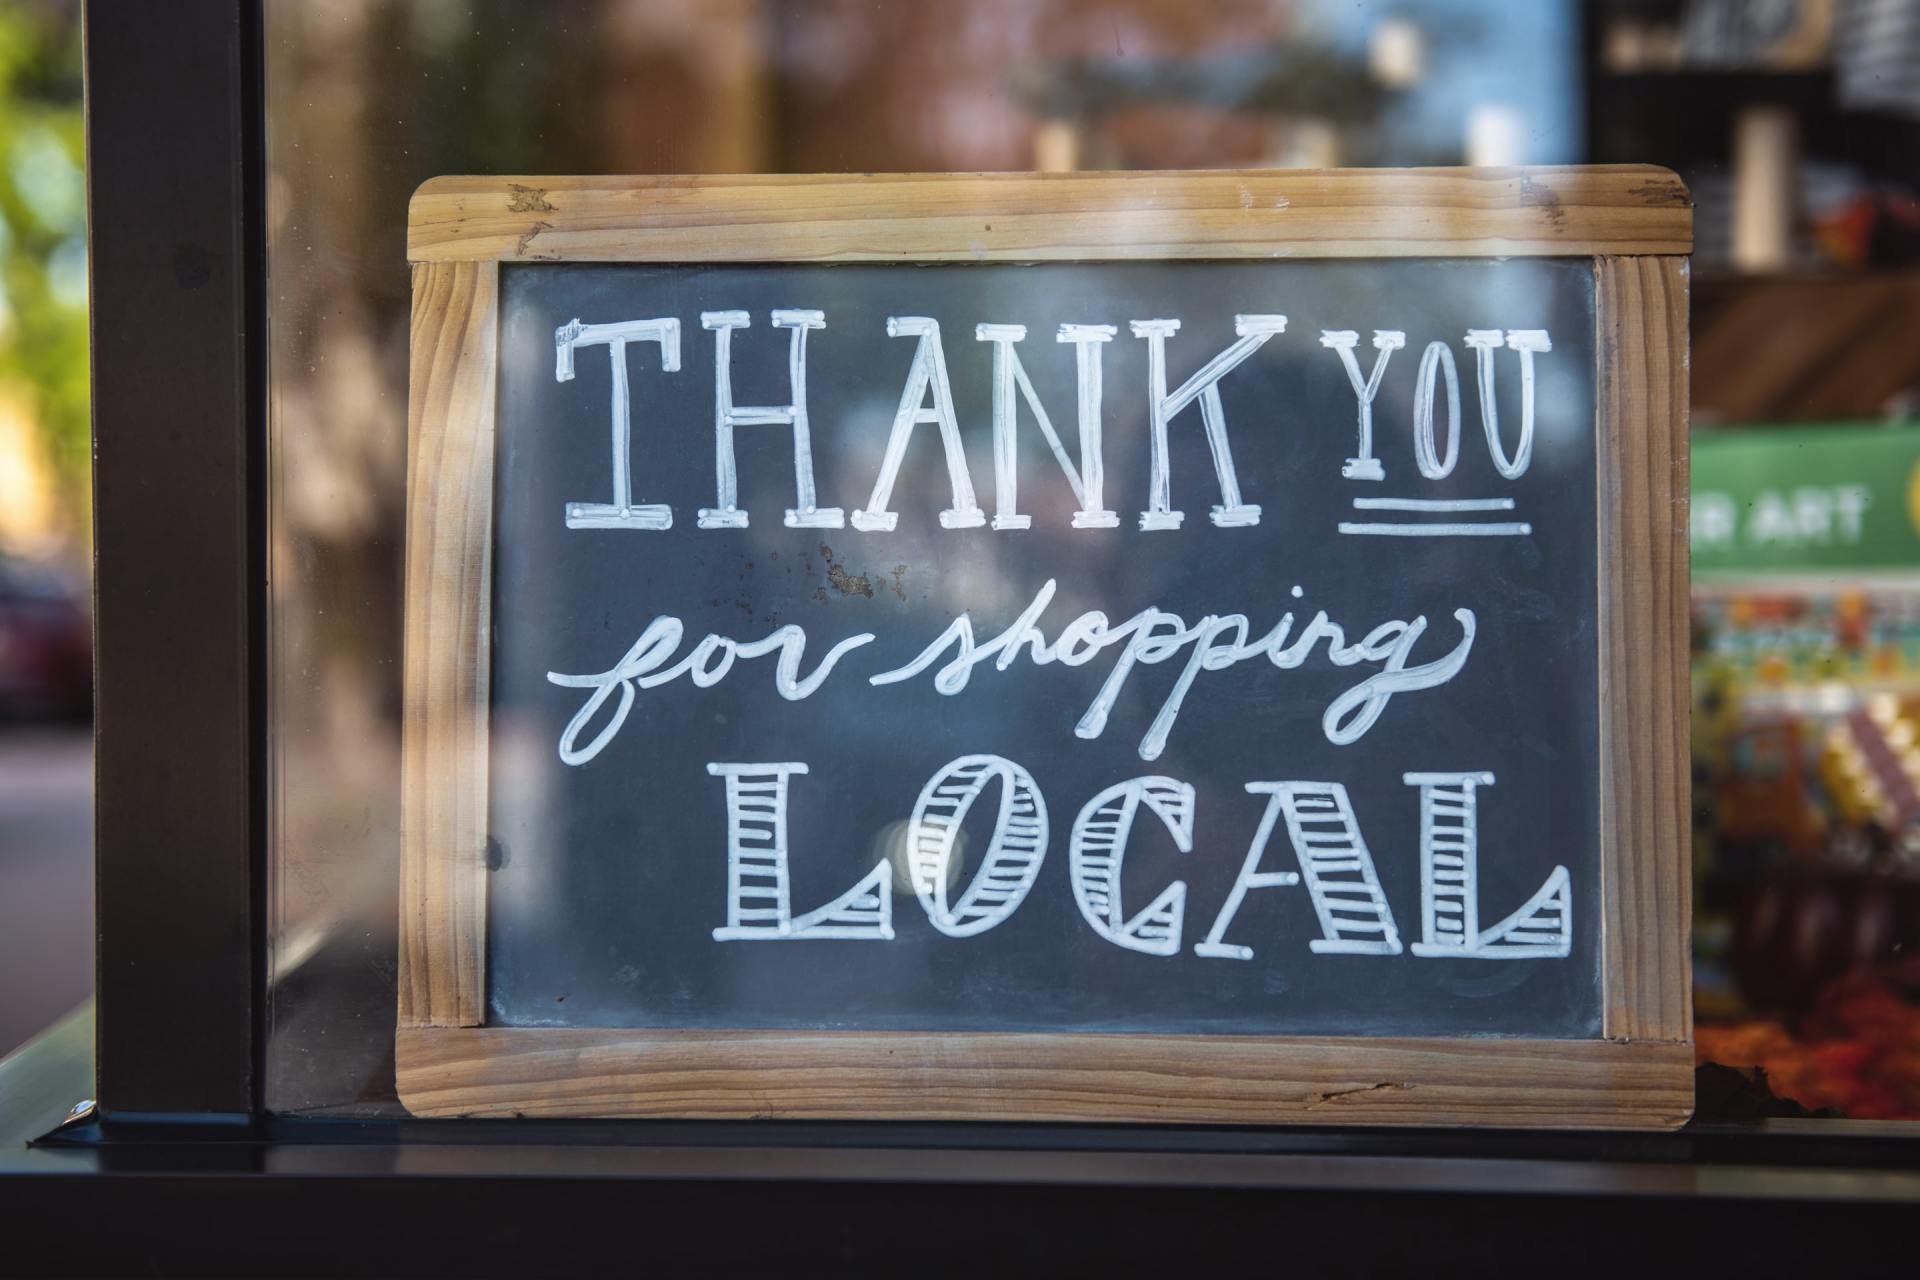 Thank you for shoppig local